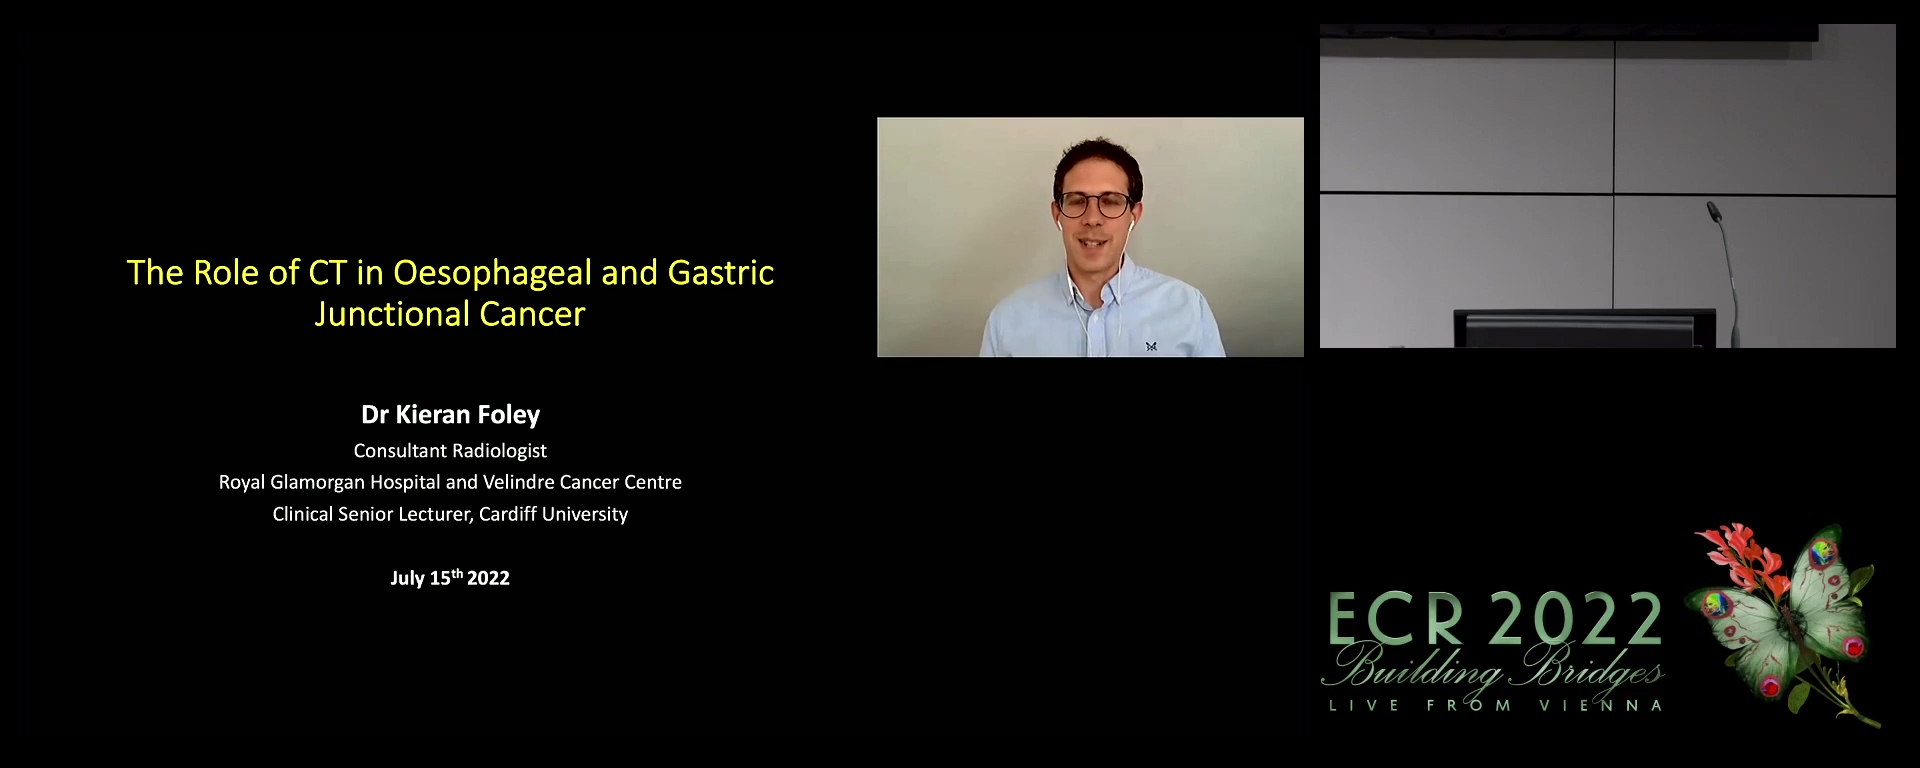 The role of CT in oesophageal and gastric junctional cancer - Kieran Foley, Llantrisant / UK